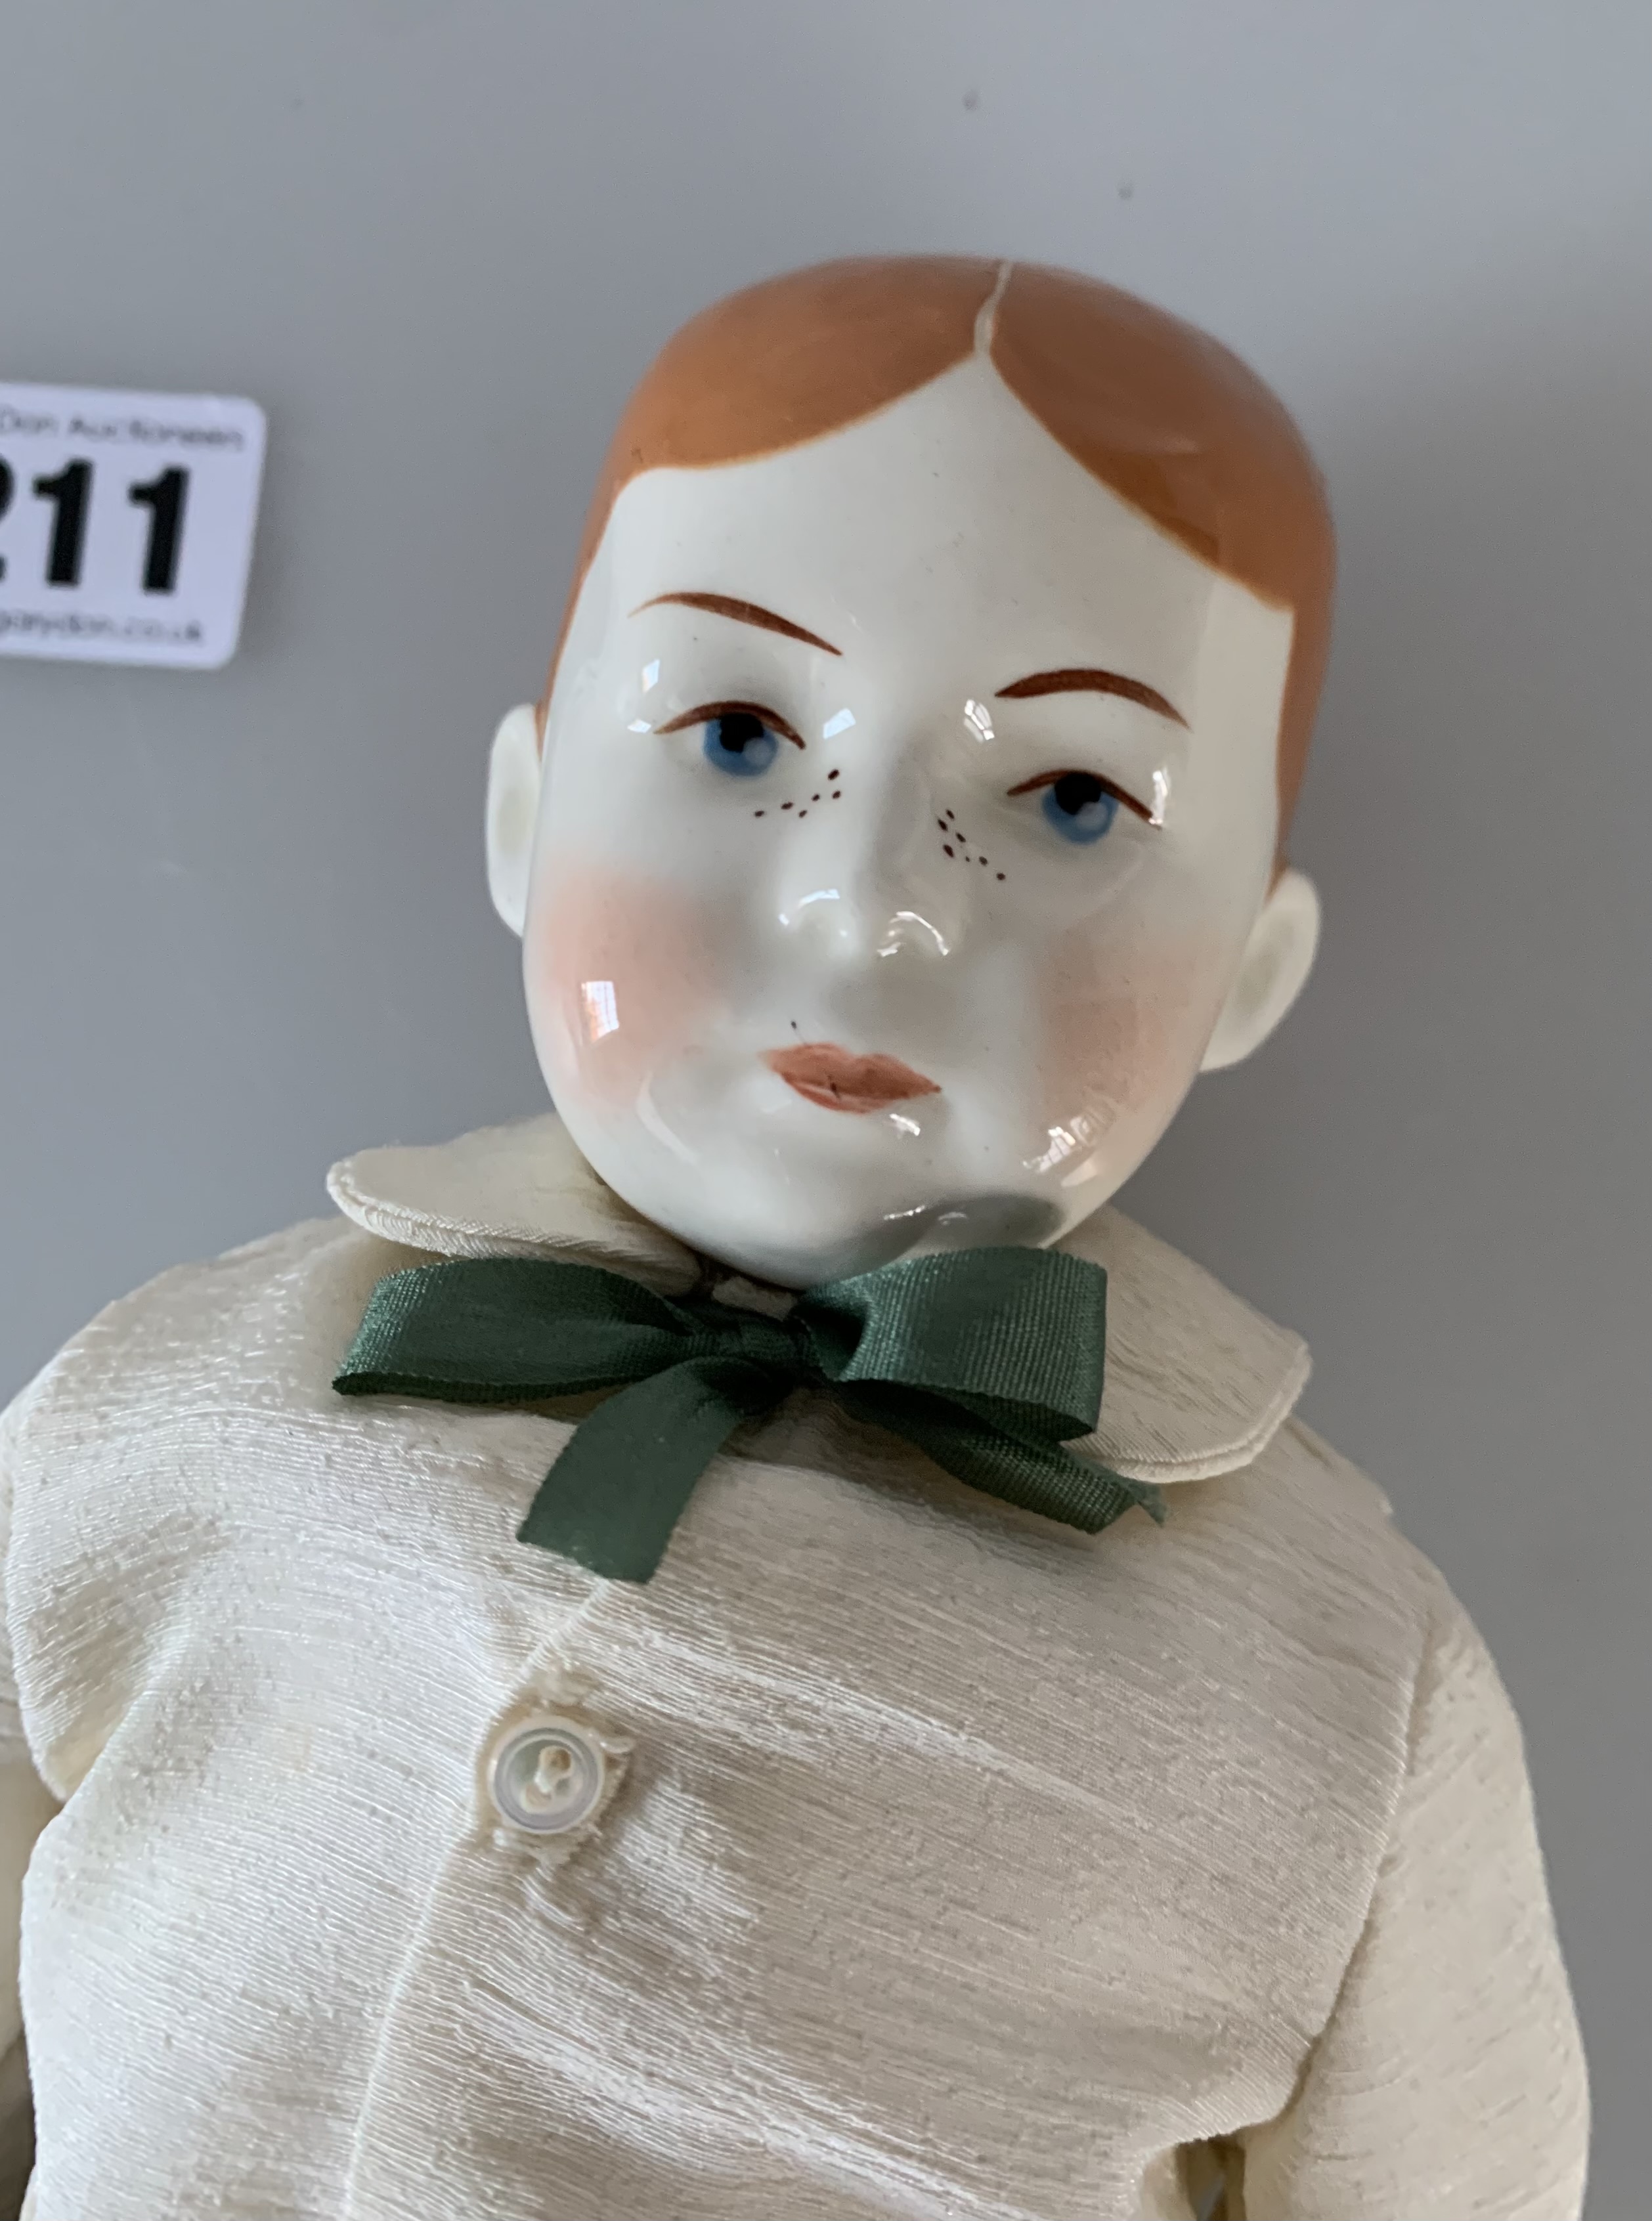 China boy doll dressed in brown velvet trousers, cream shirt, green tie. 13” high - Image 3 of 6